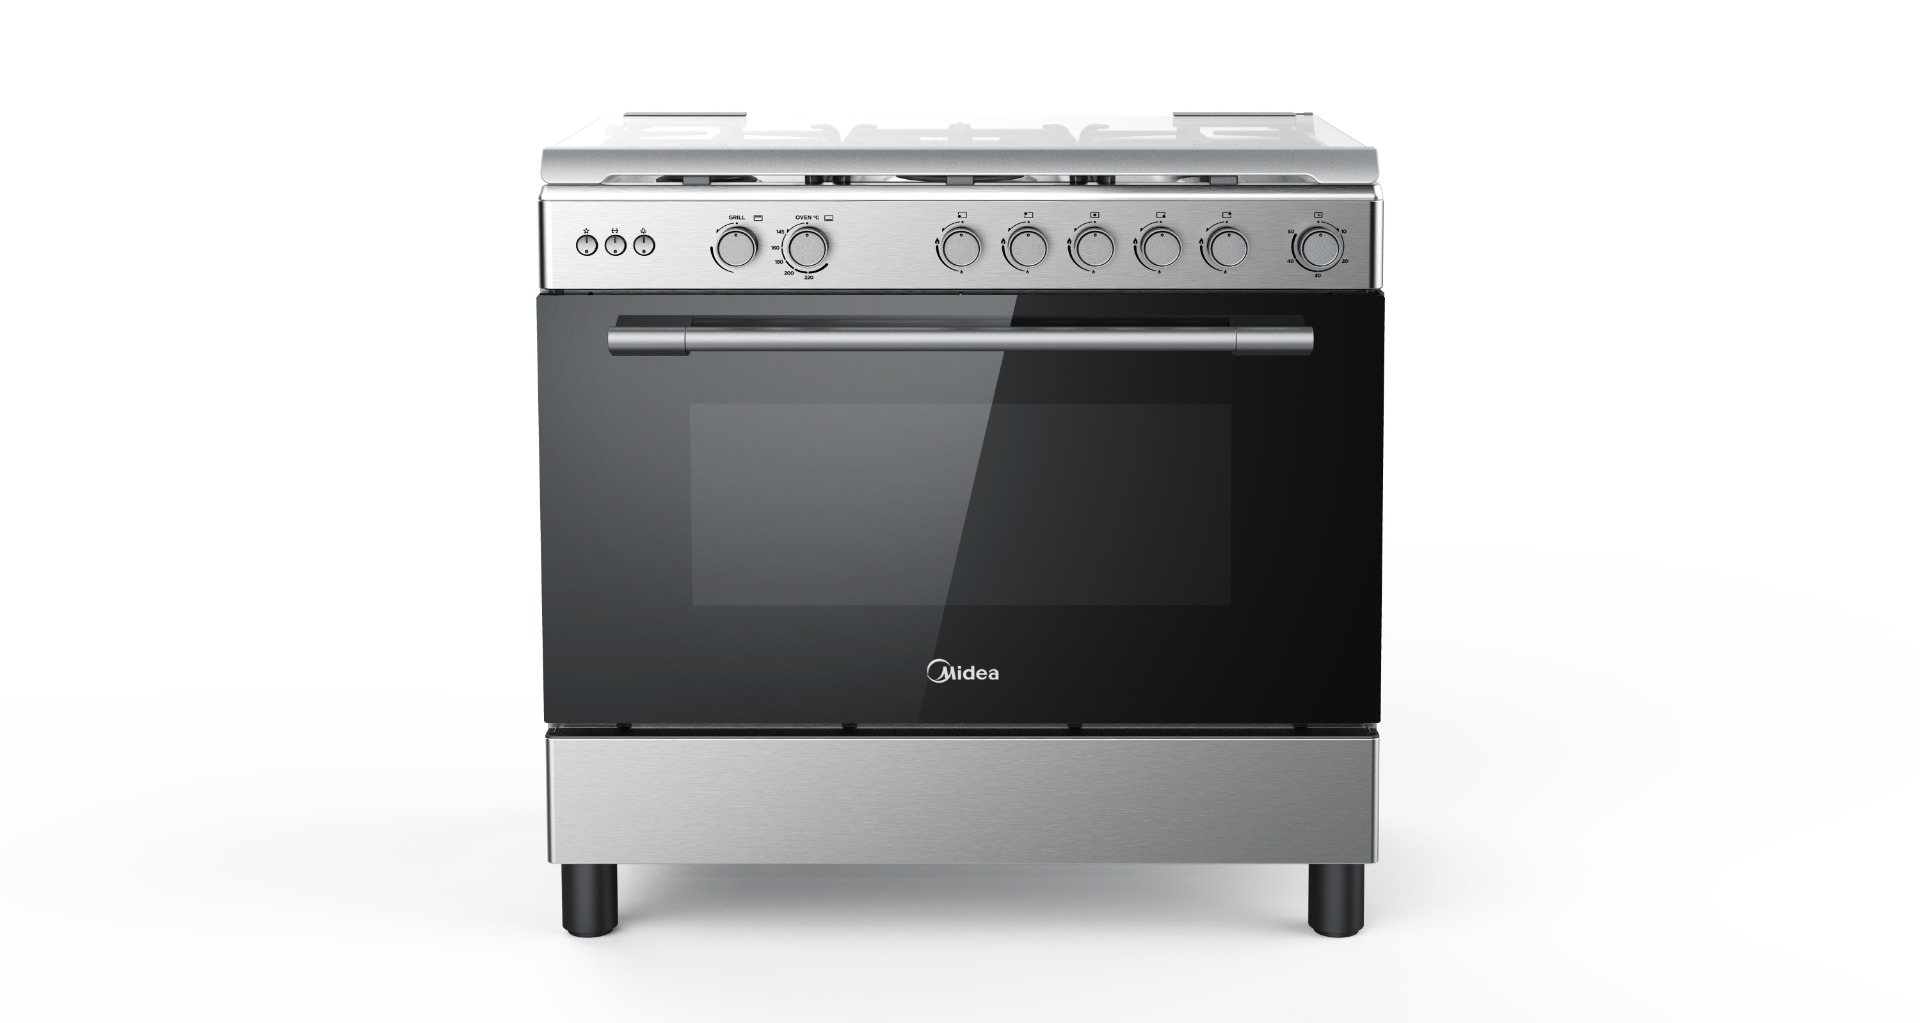 MIDEA Gas Oven 60 x 90 cm, 5 P Gas Including 1 Double Burner, Auto Ignition, Full Safety, Steel - 36LMG5G030